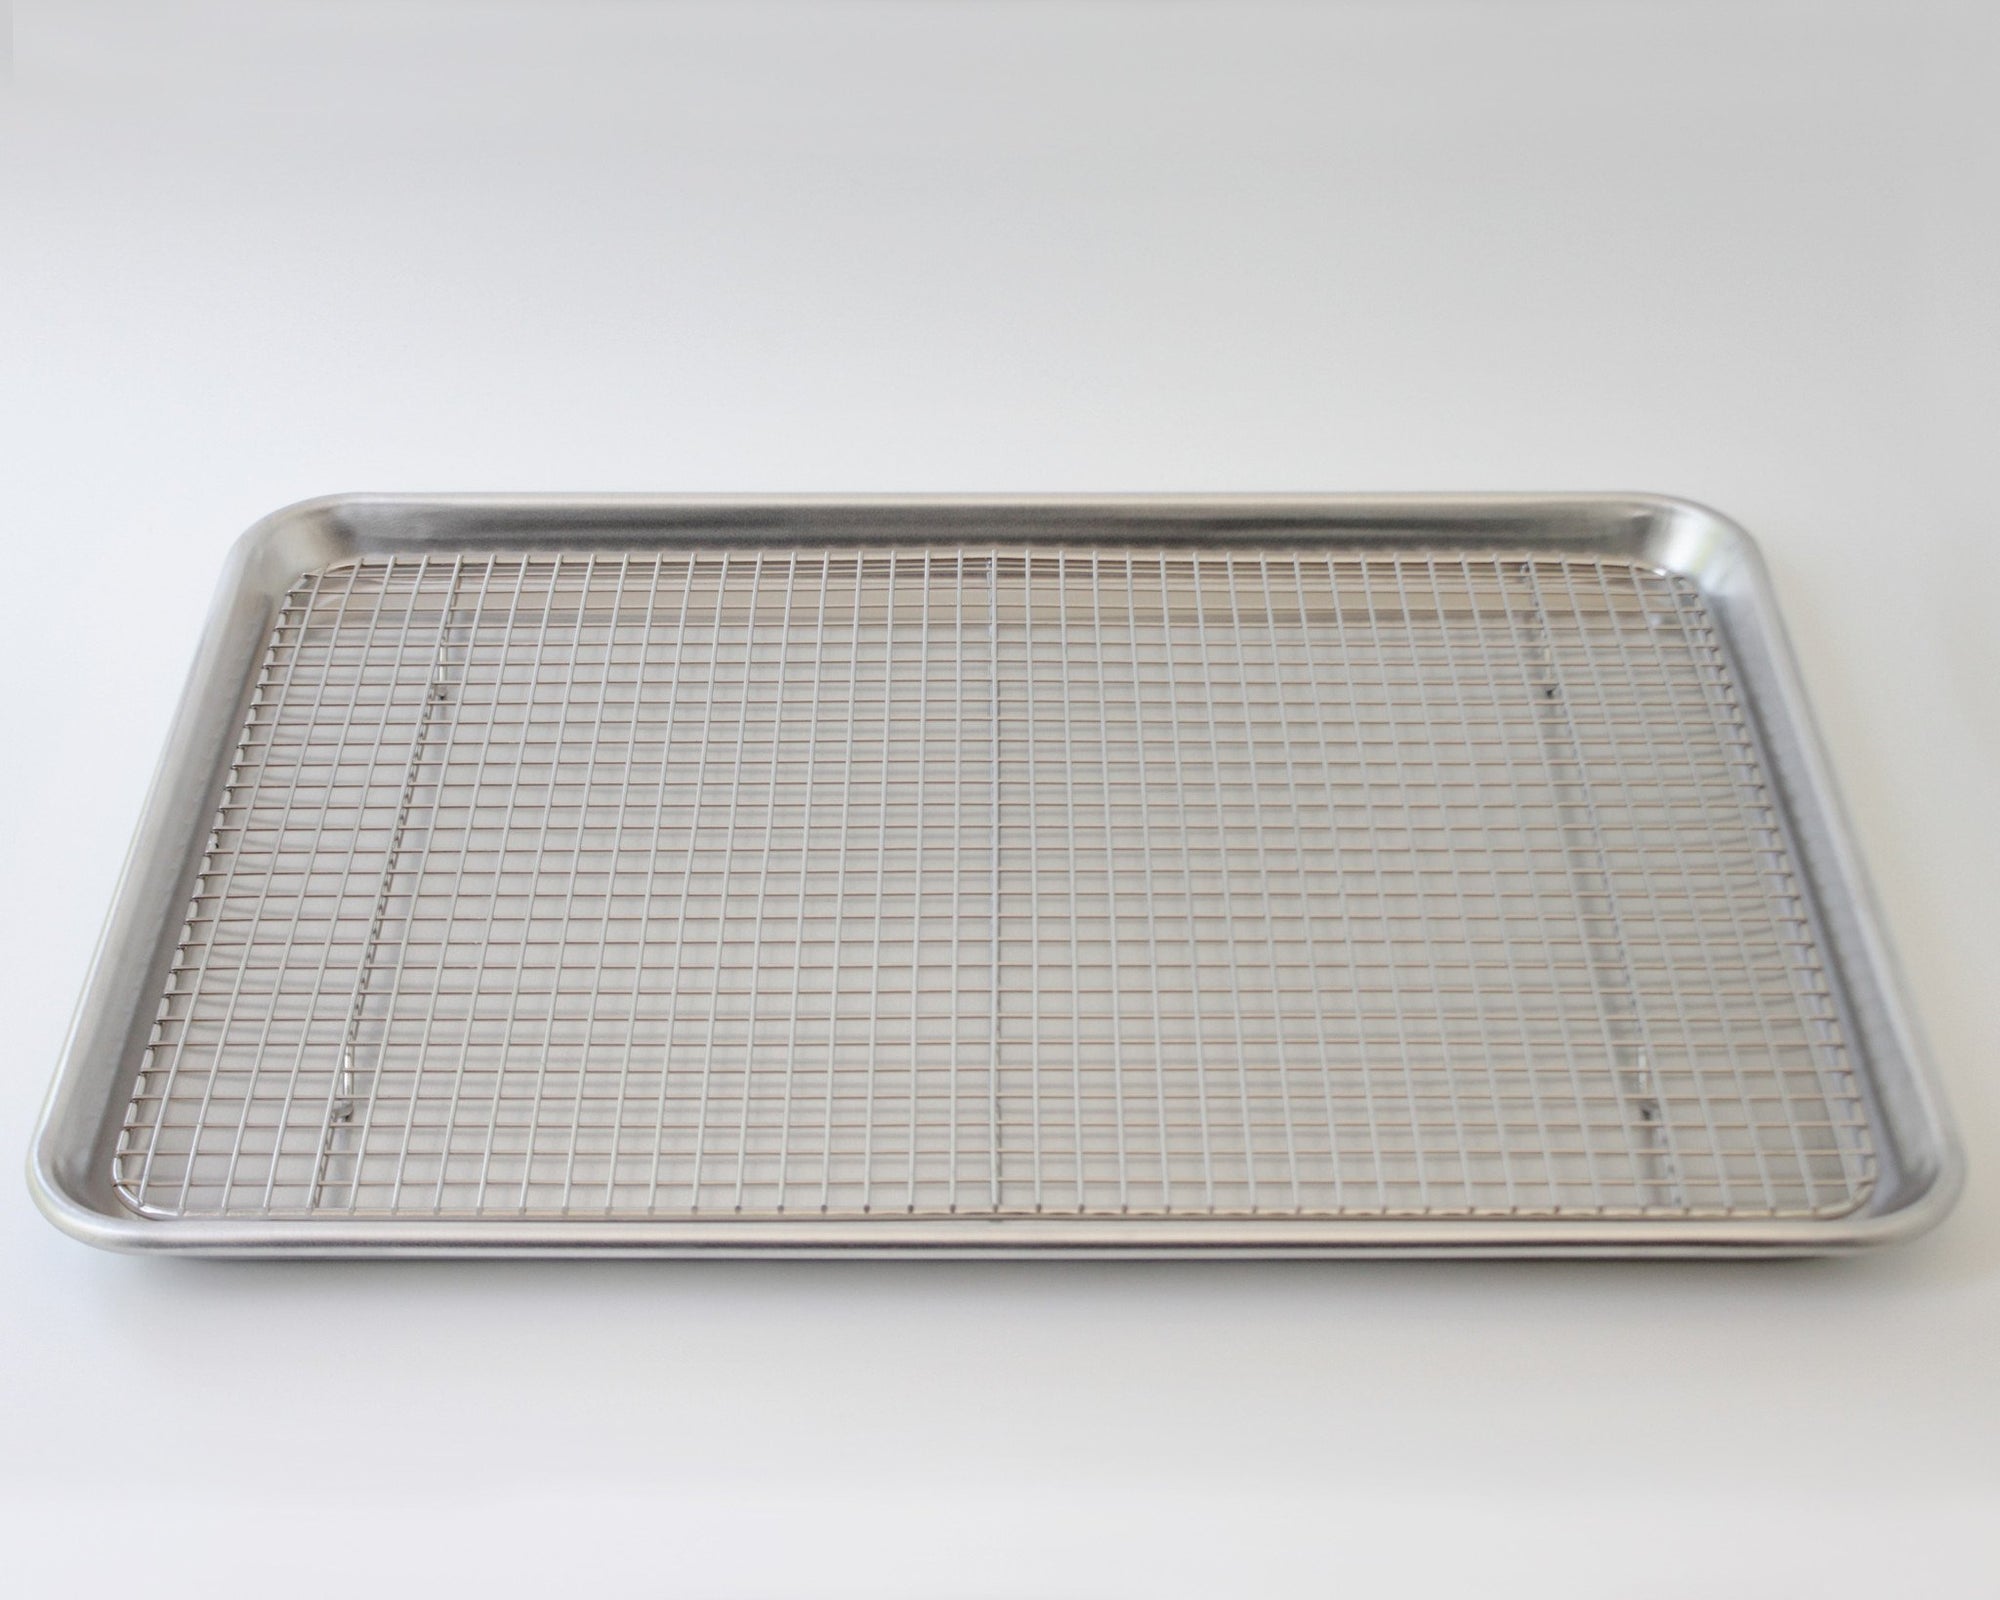 Baking Tray With Wire Rack Set 304 Stainless Steel Baking Sheet Pan BBQ Tray  Oven Rack For Cooking Roasting Grilling Baking Tool